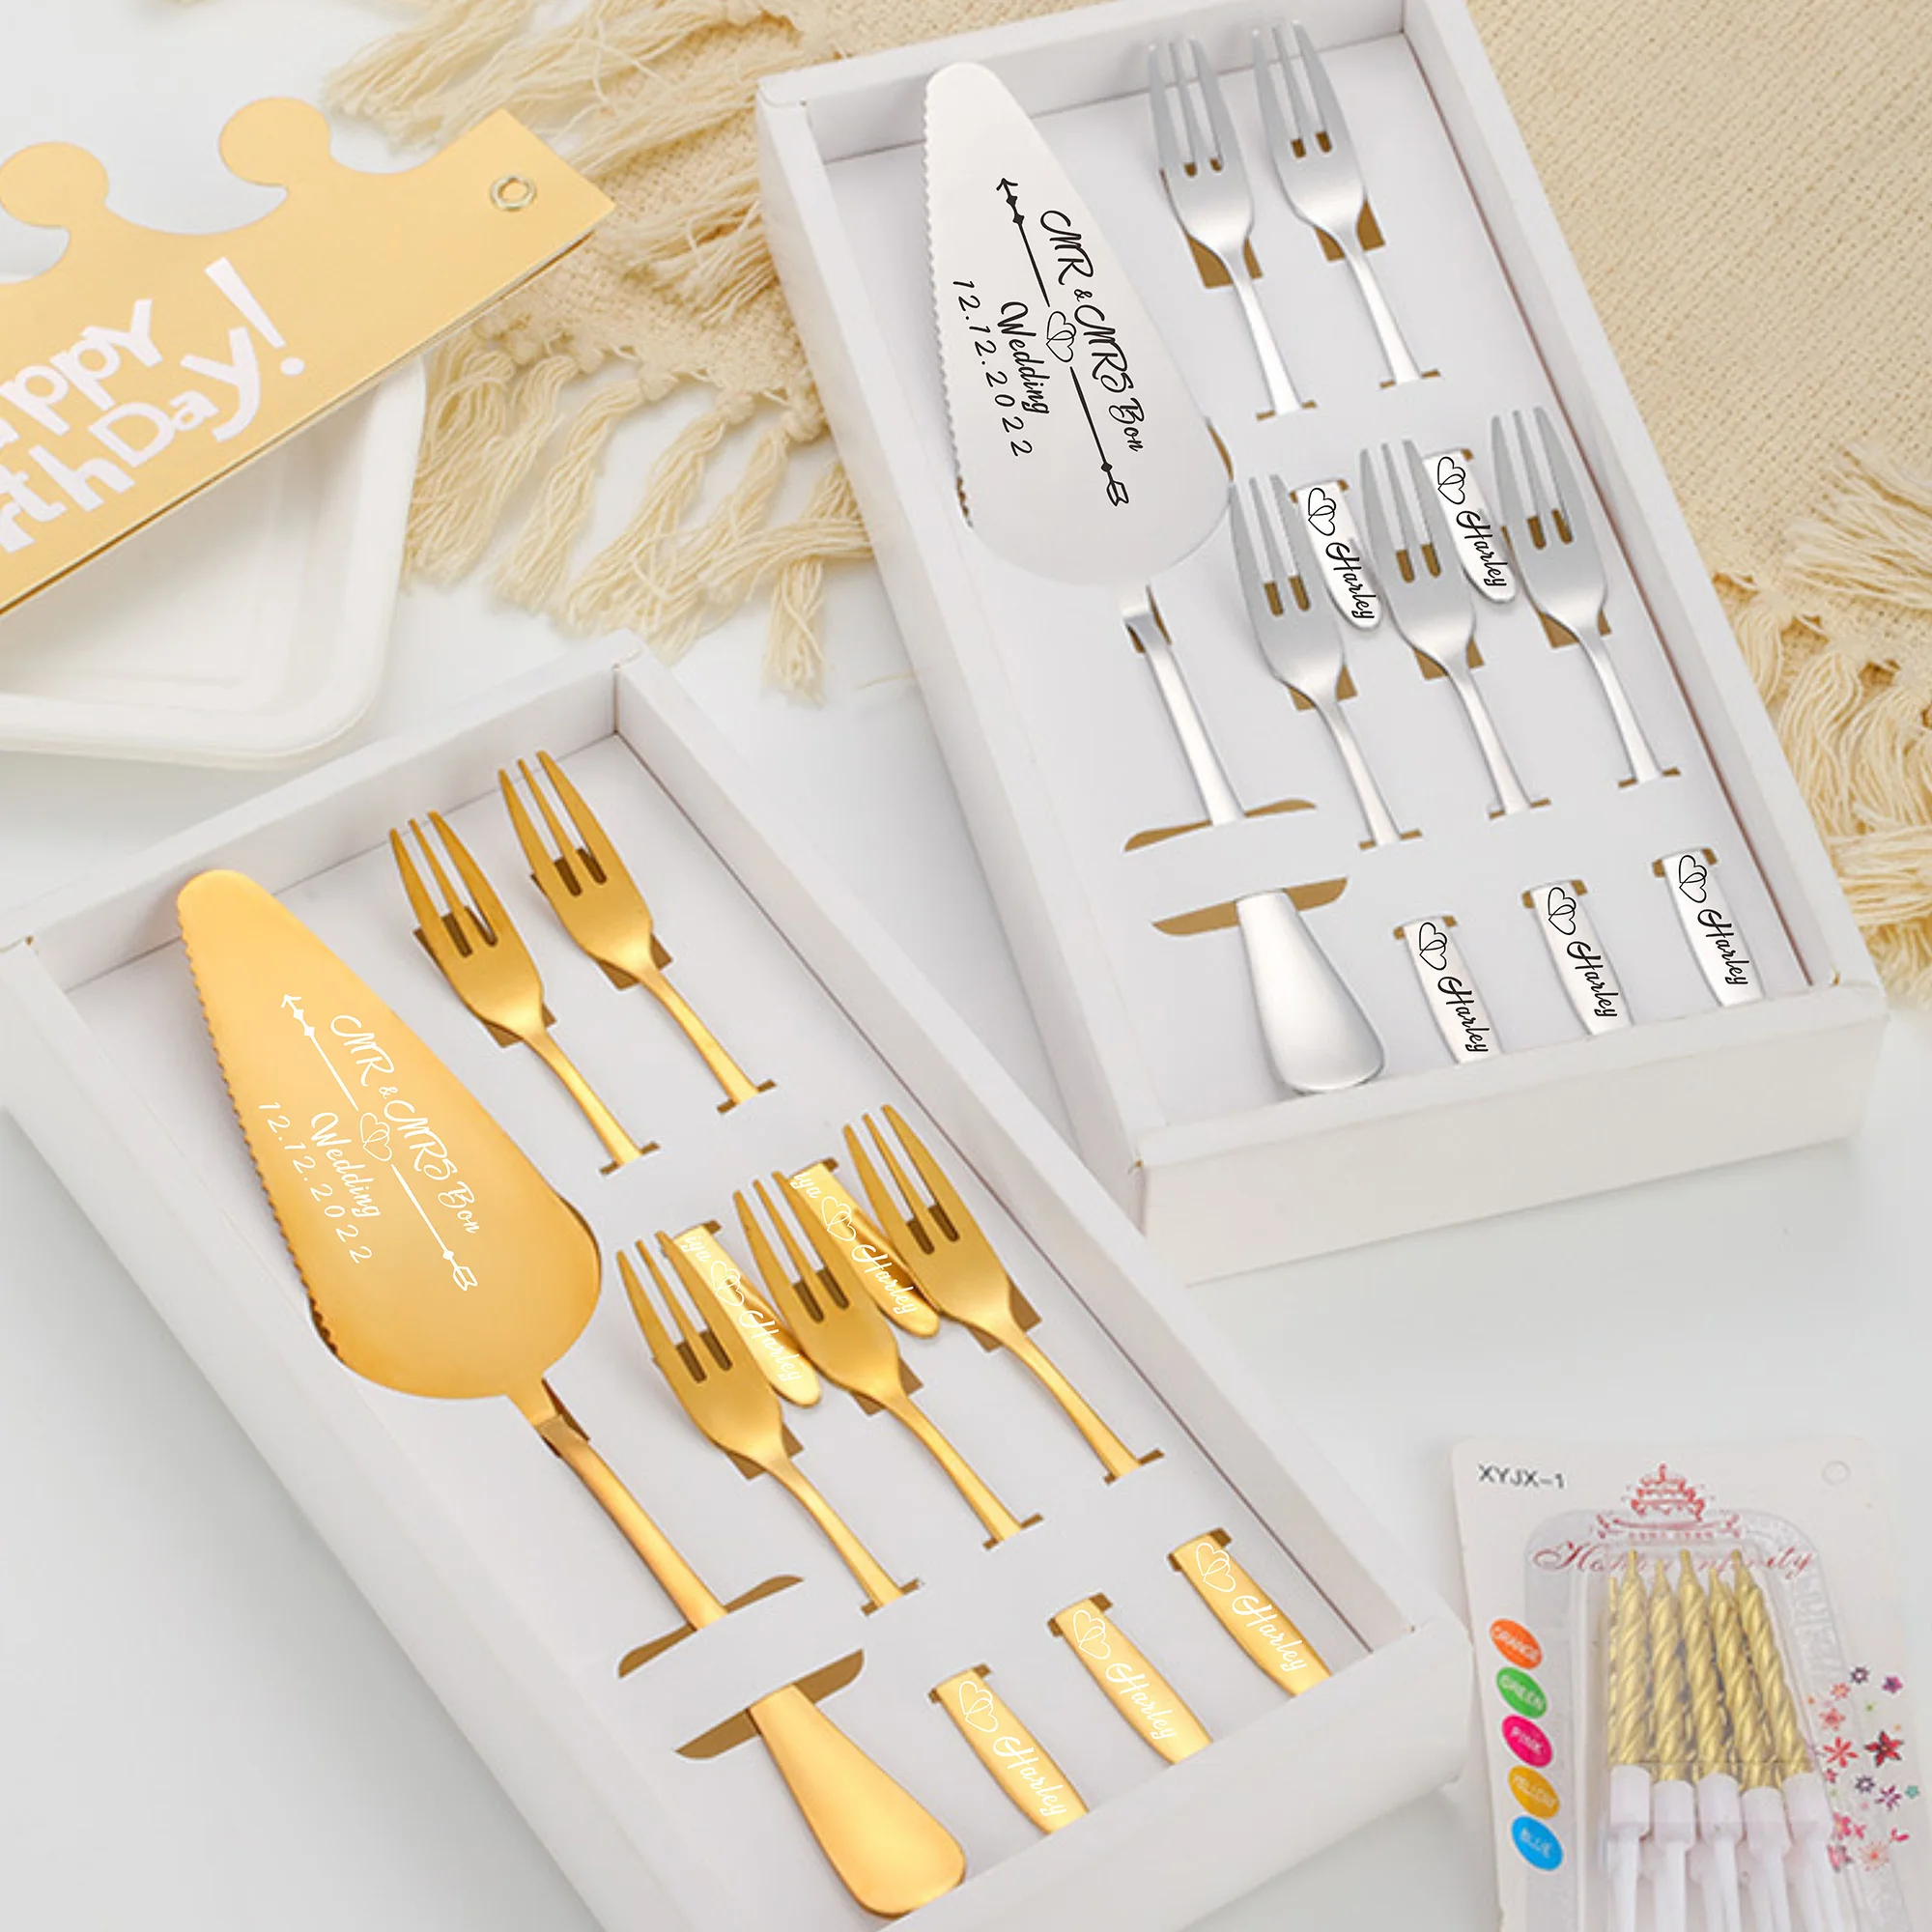 1 Set Personalized Wedding Cake Knife Server Set With Forks Customized Tableware Suit Birthday Gift Party Decorative Articles